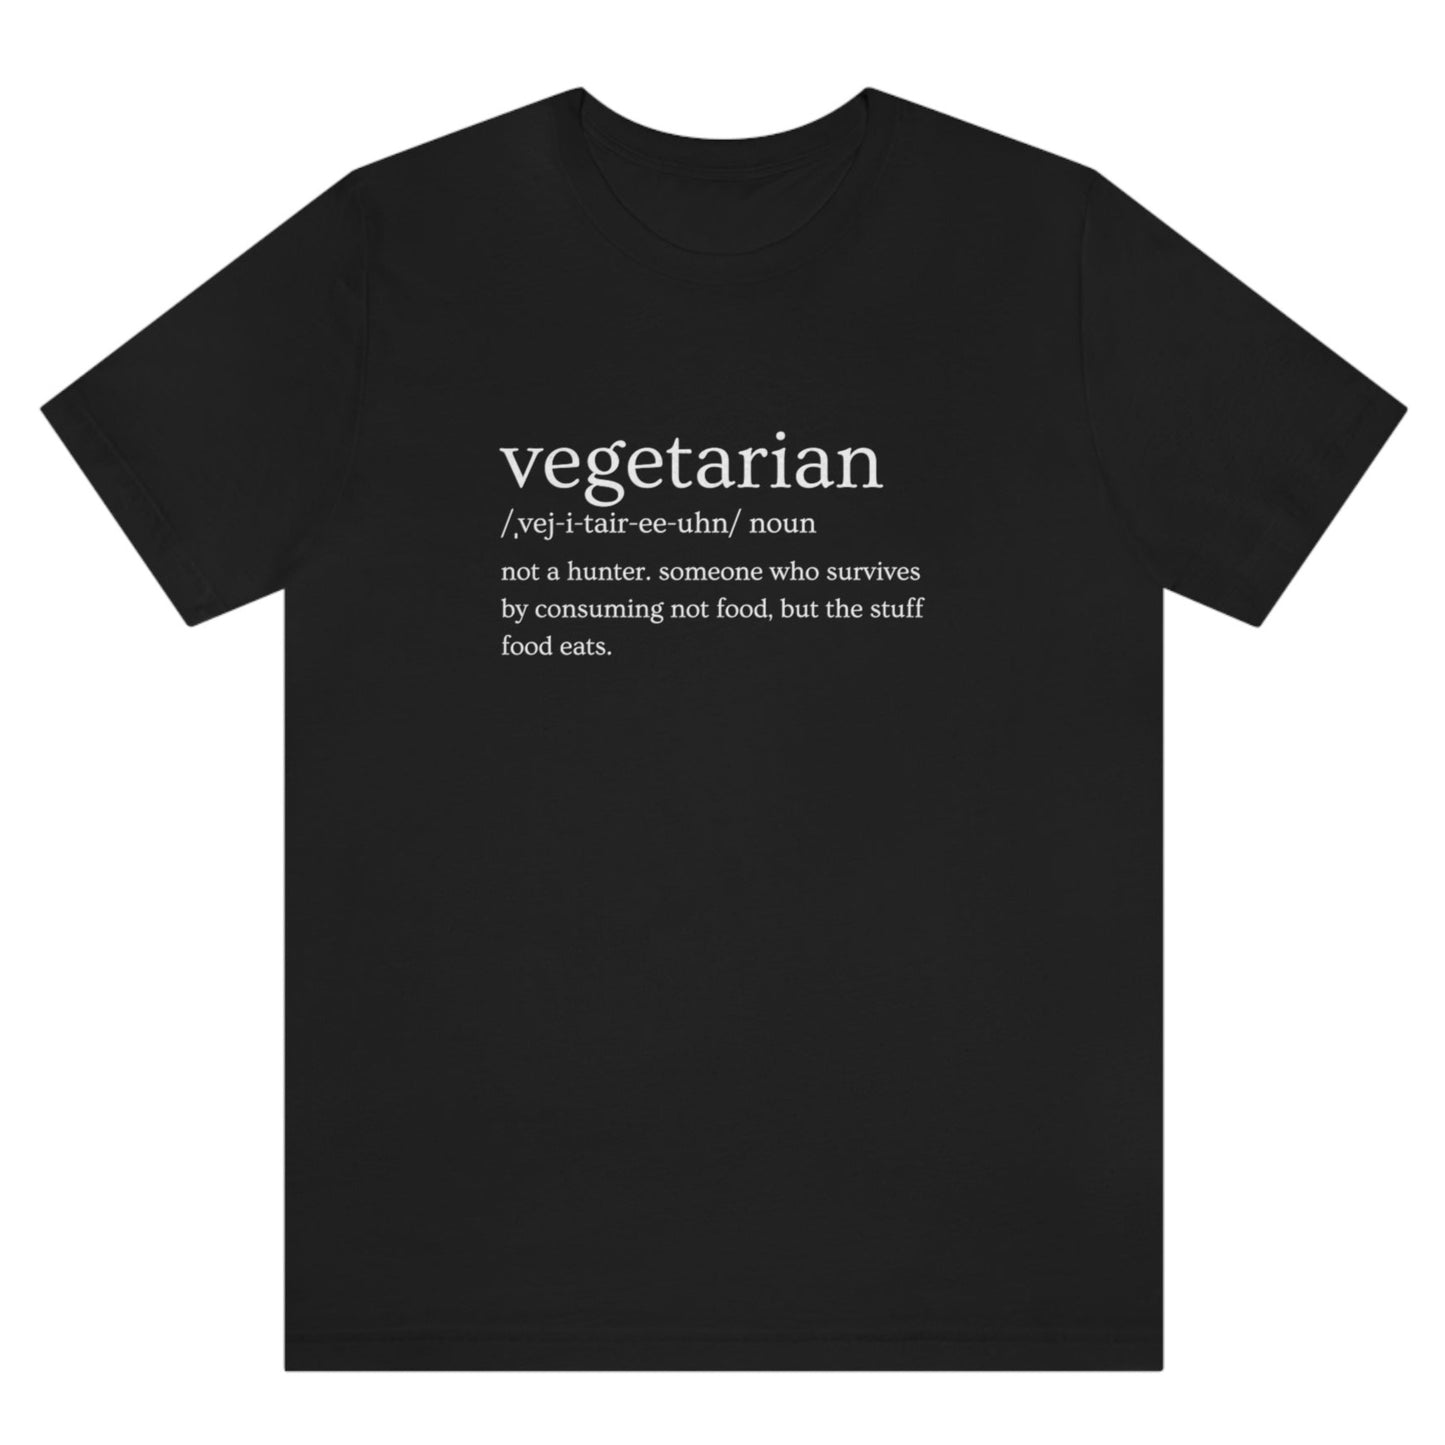 vegetarian-definition-not-a-hunter-someone-who-survives-by-consuming-not-food-but-the-stuff-food-eats-black-t-shirt